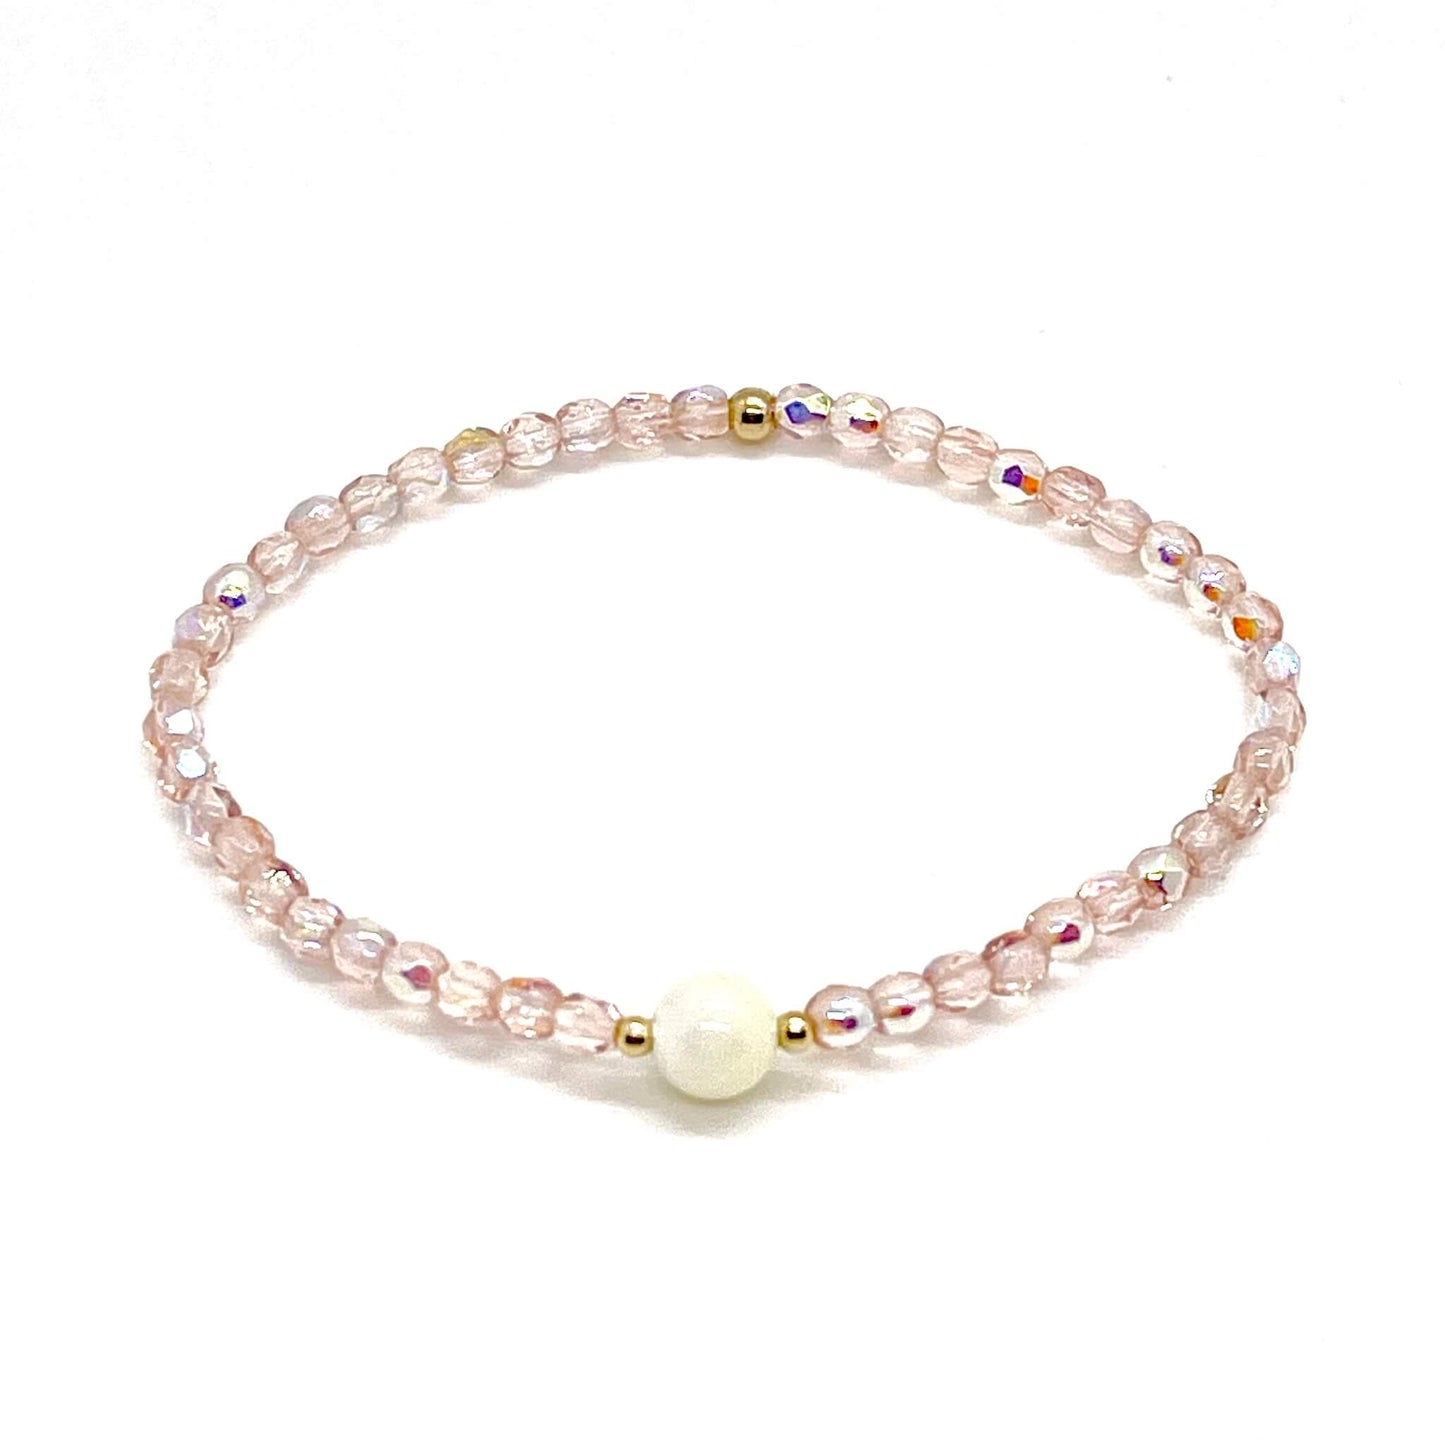 Blush-rose crystal bracelet with a mother-of-pearl center bead and small gold accent beads.